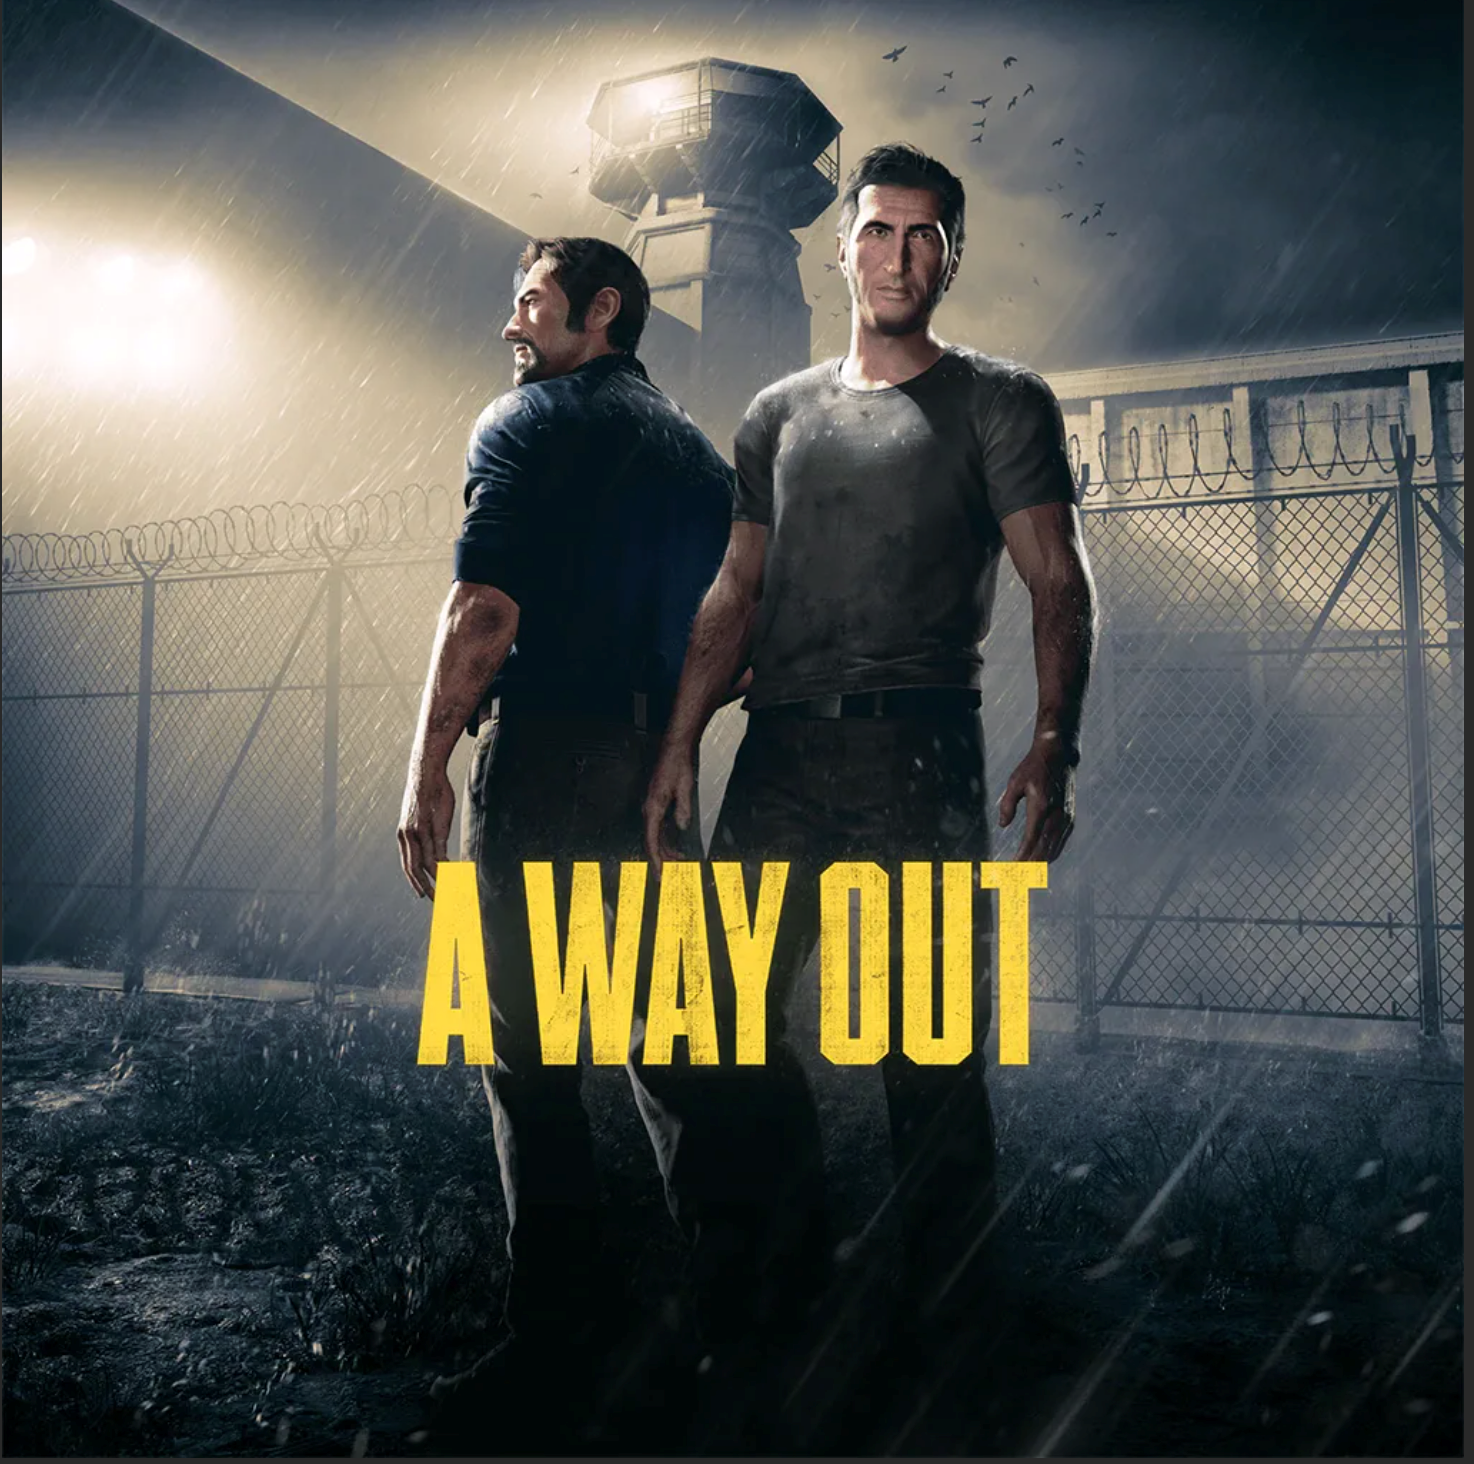 A way out game. A way out ps4. Way out ПС 5. Игра на пс4 a way out. A way out ps4 обзор.